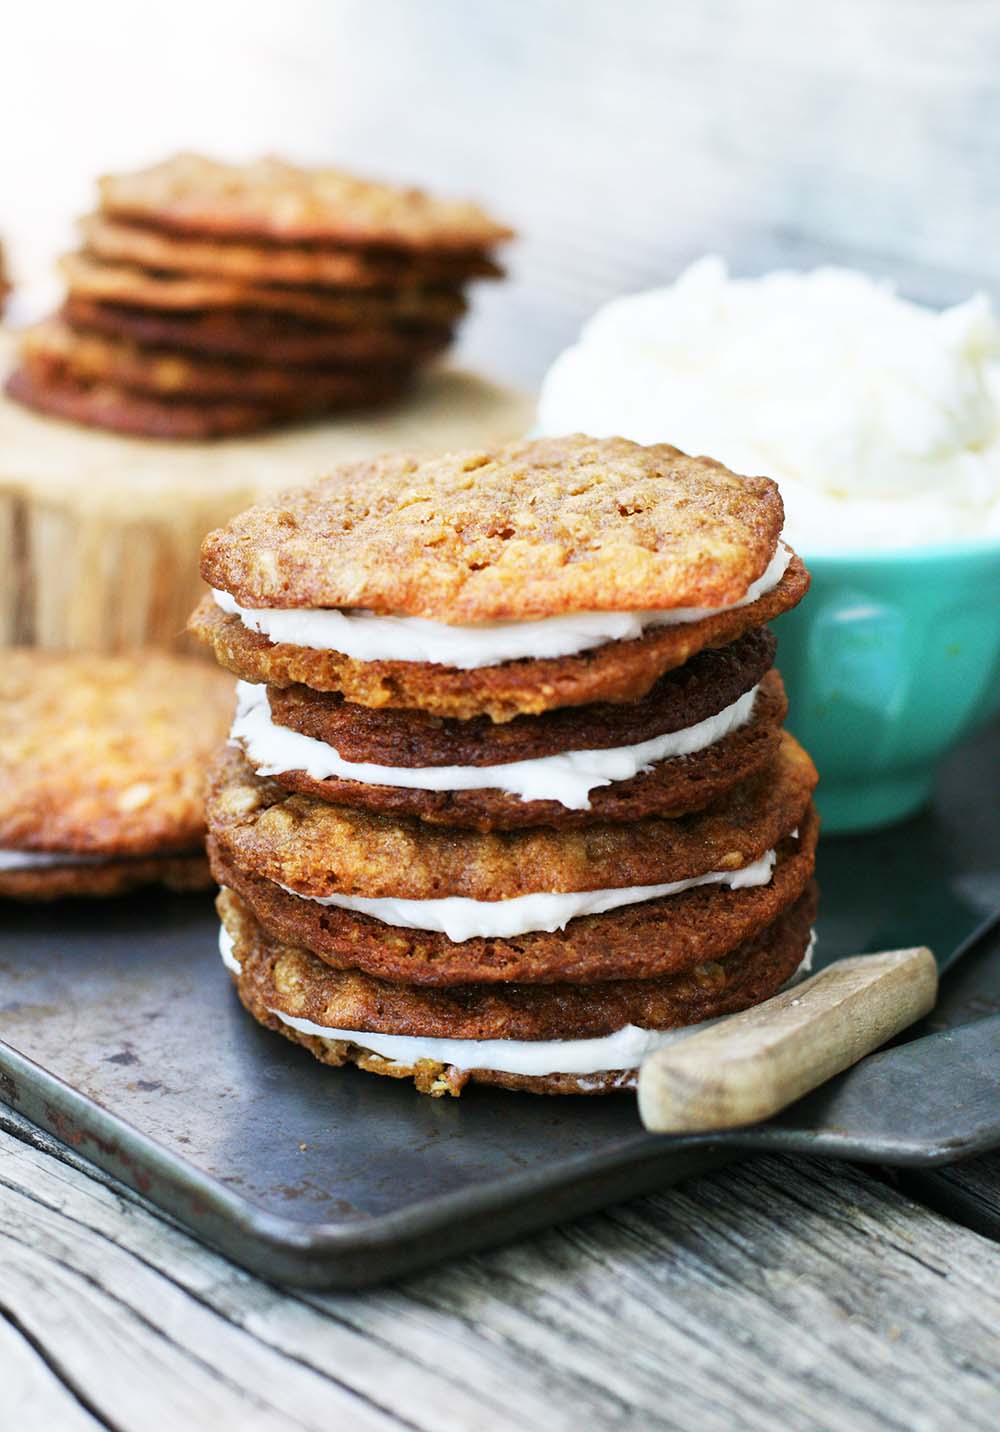 Homemade oatmeal cream pies: Two oatmeal cookies are sandwiched together with a sweet frosting.